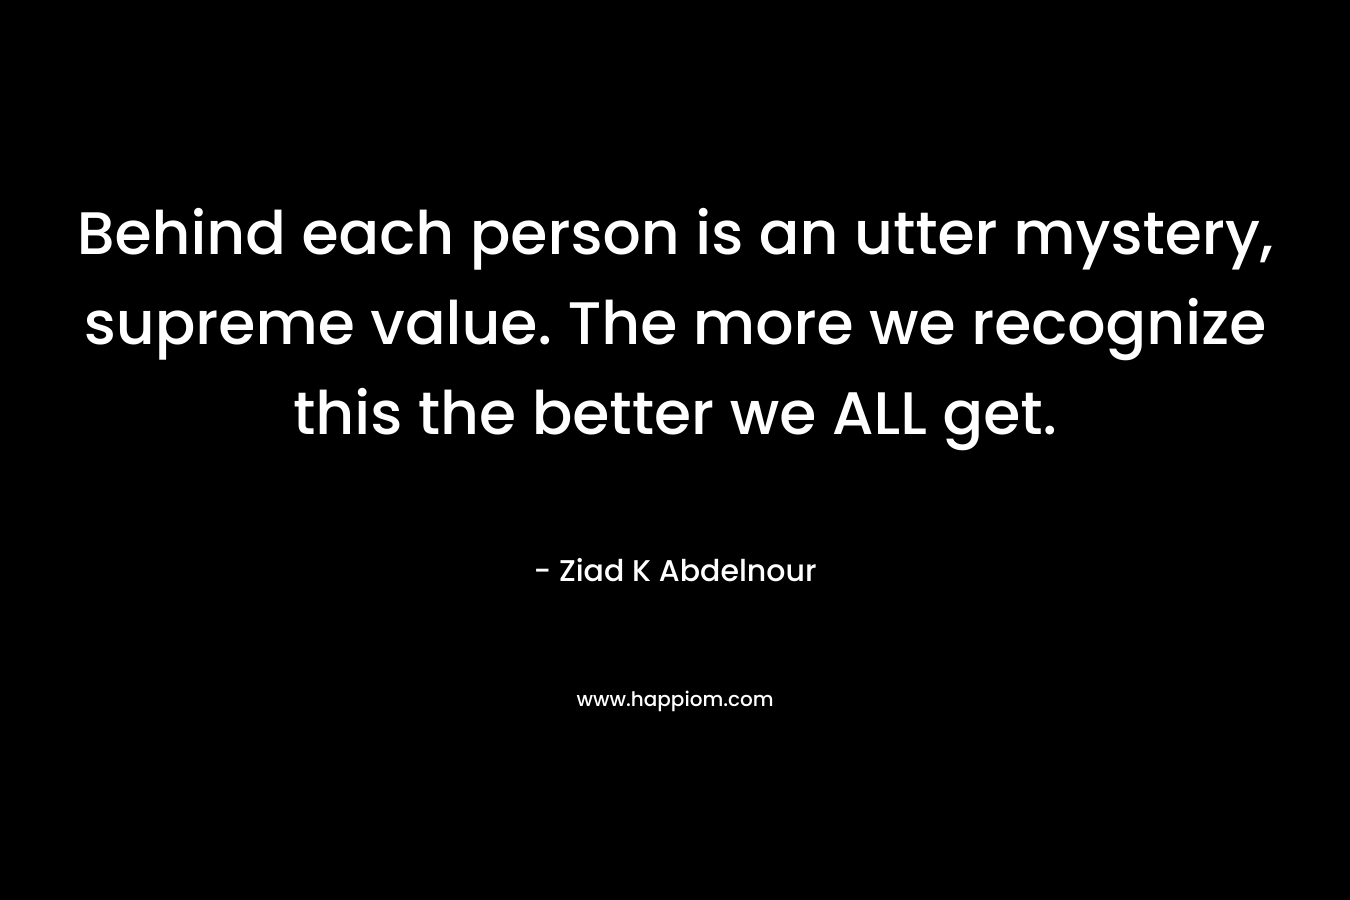 Behind each person is an utter mystery, supreme value. The more we recognize this the better we ALL get. – Ziad K Abdelnour